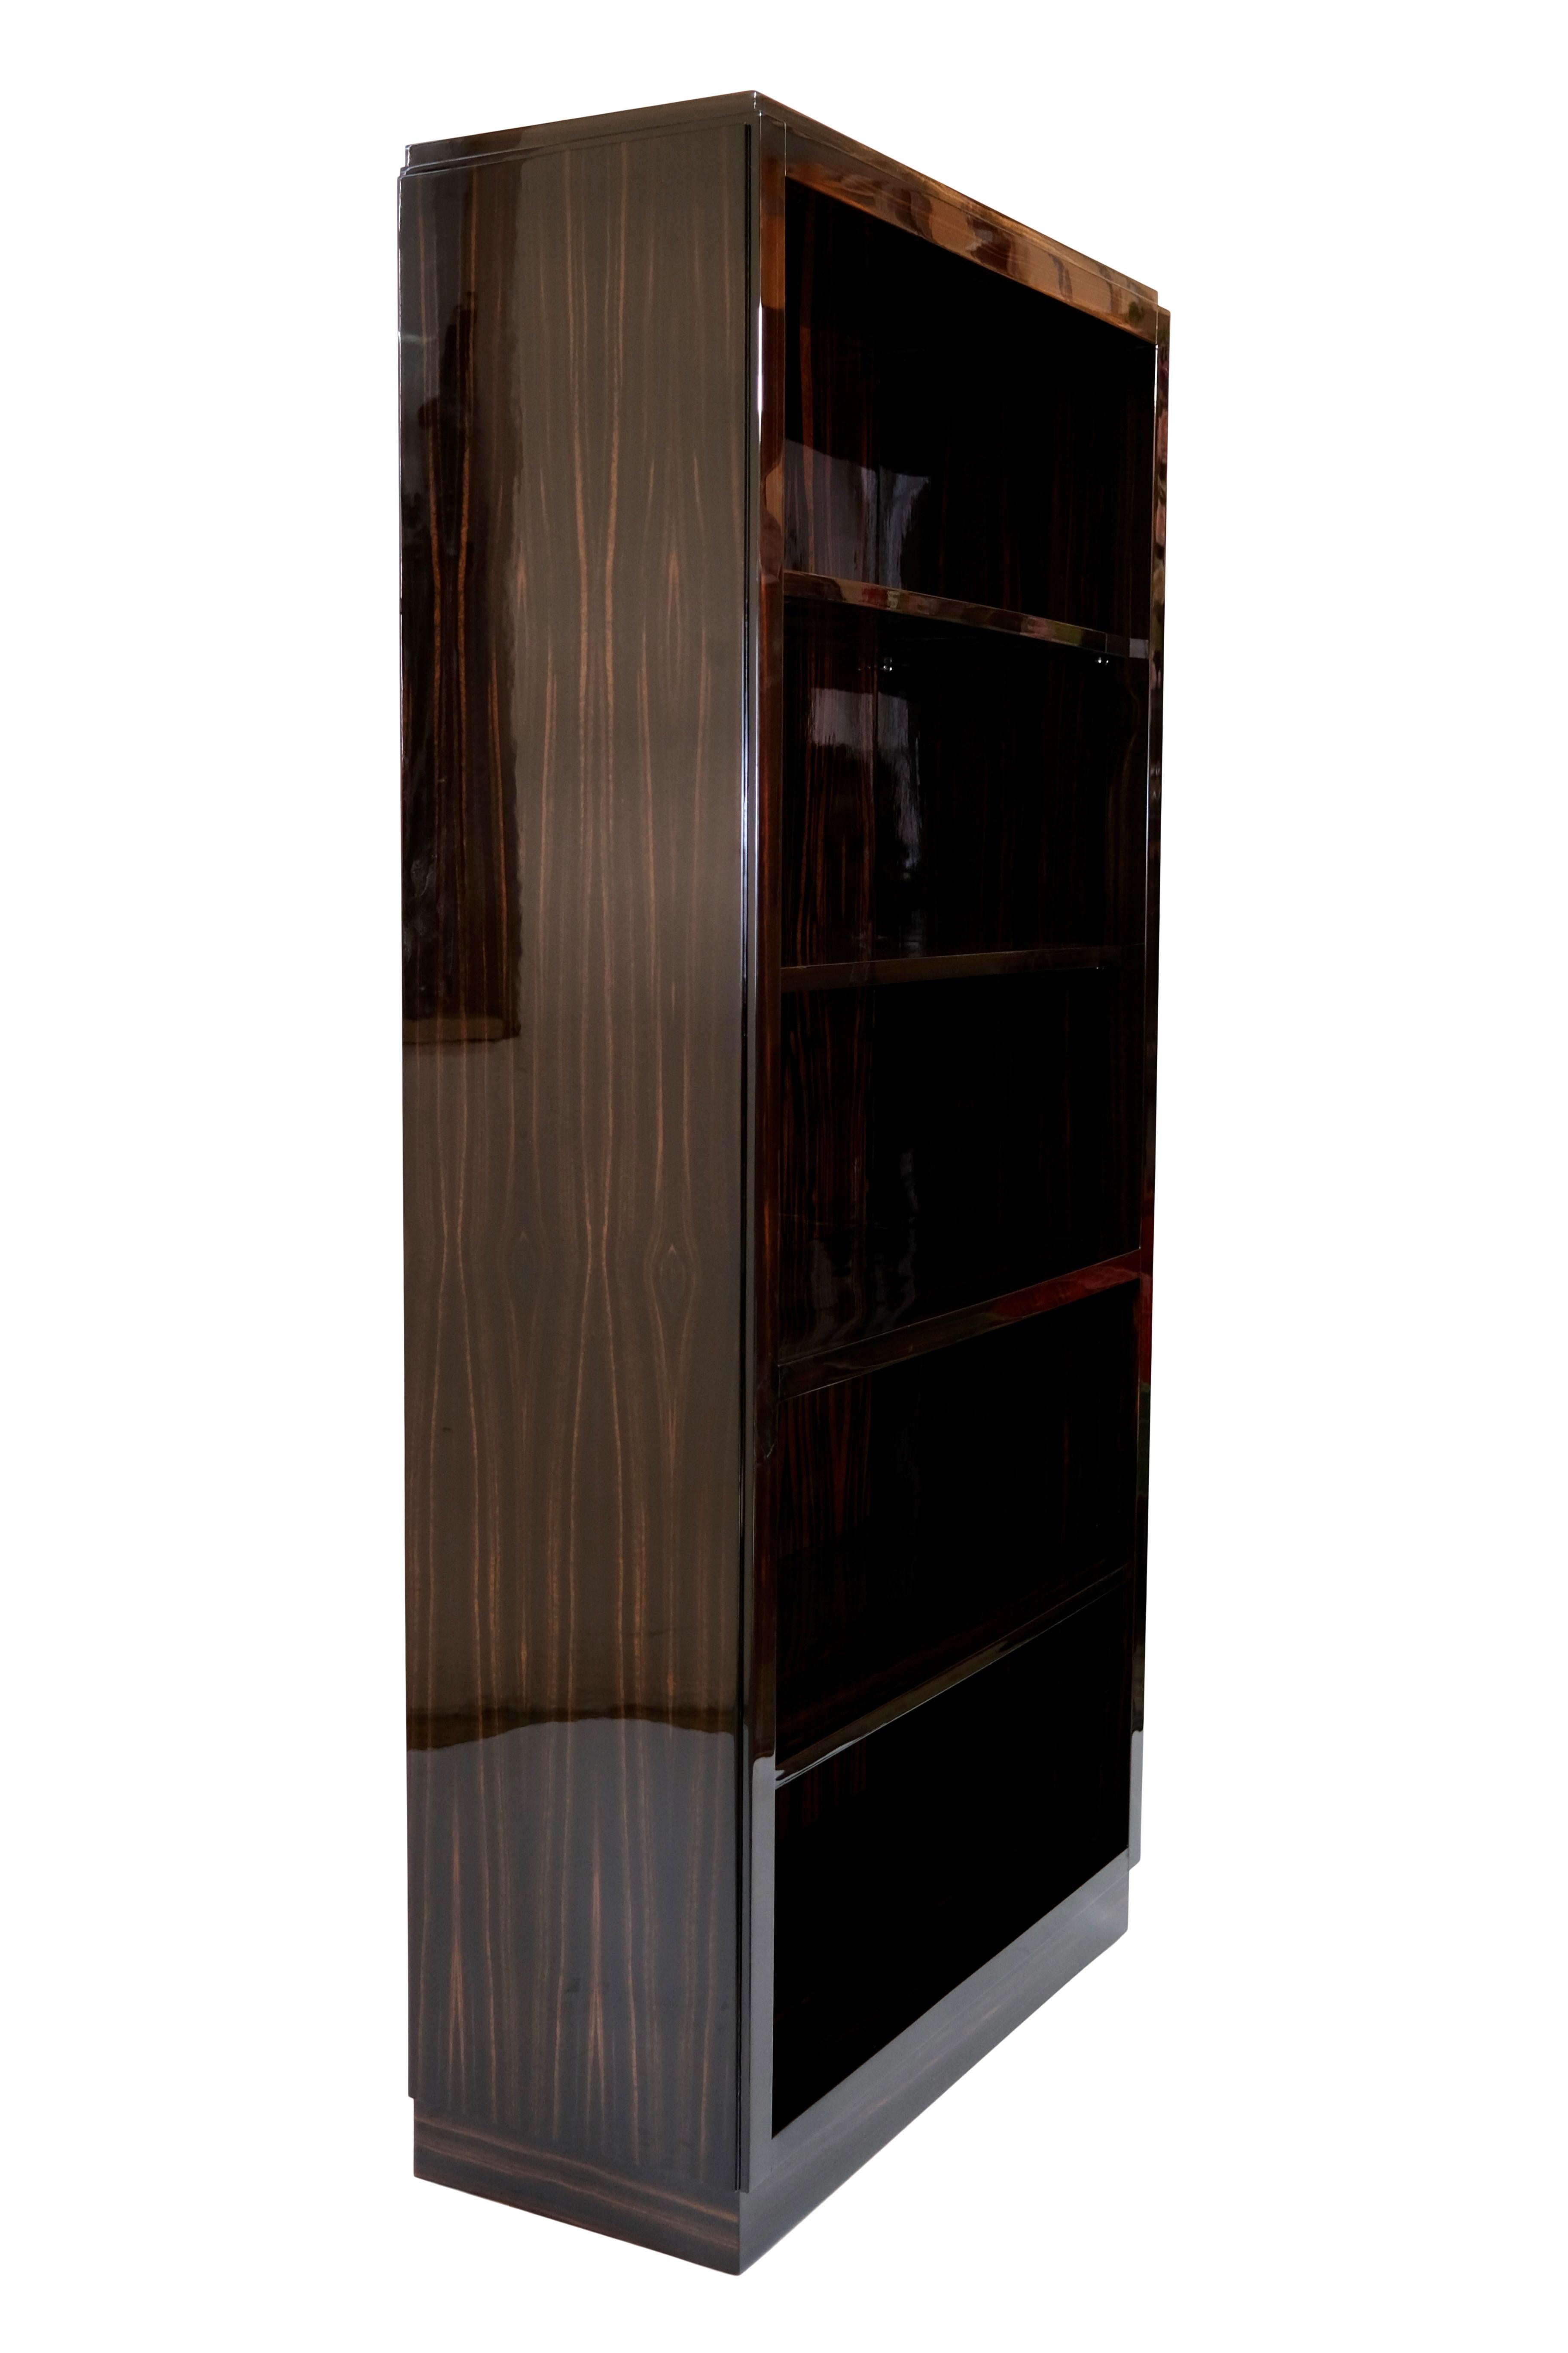 Lacquered French 1930s Art Deco Wooden Shelf with Macassar Veneer in High Gloss Lacquer